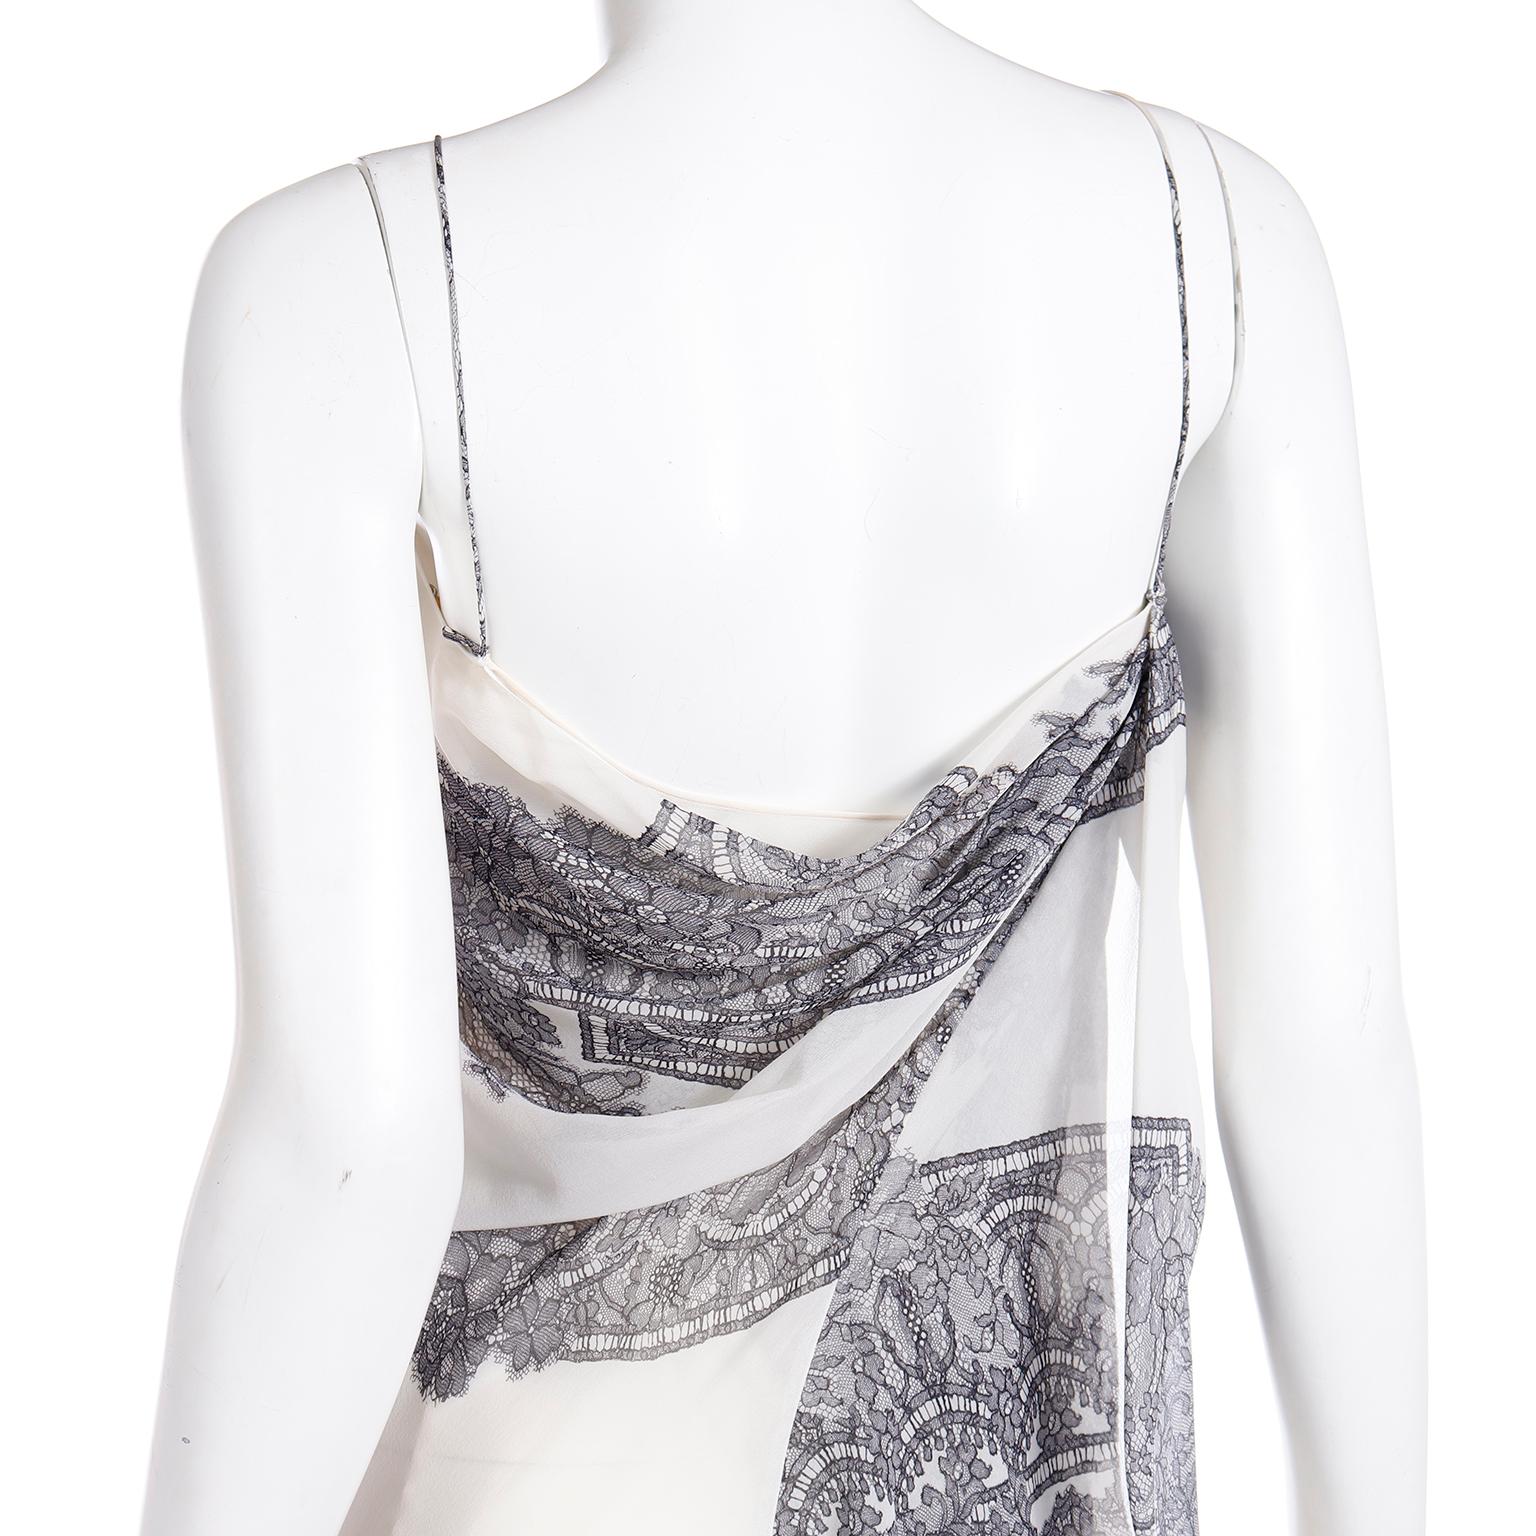 Jean Paul Gaultier 2007 Deadstock Lace Print Slip Dress with Original Tags For Sale 6